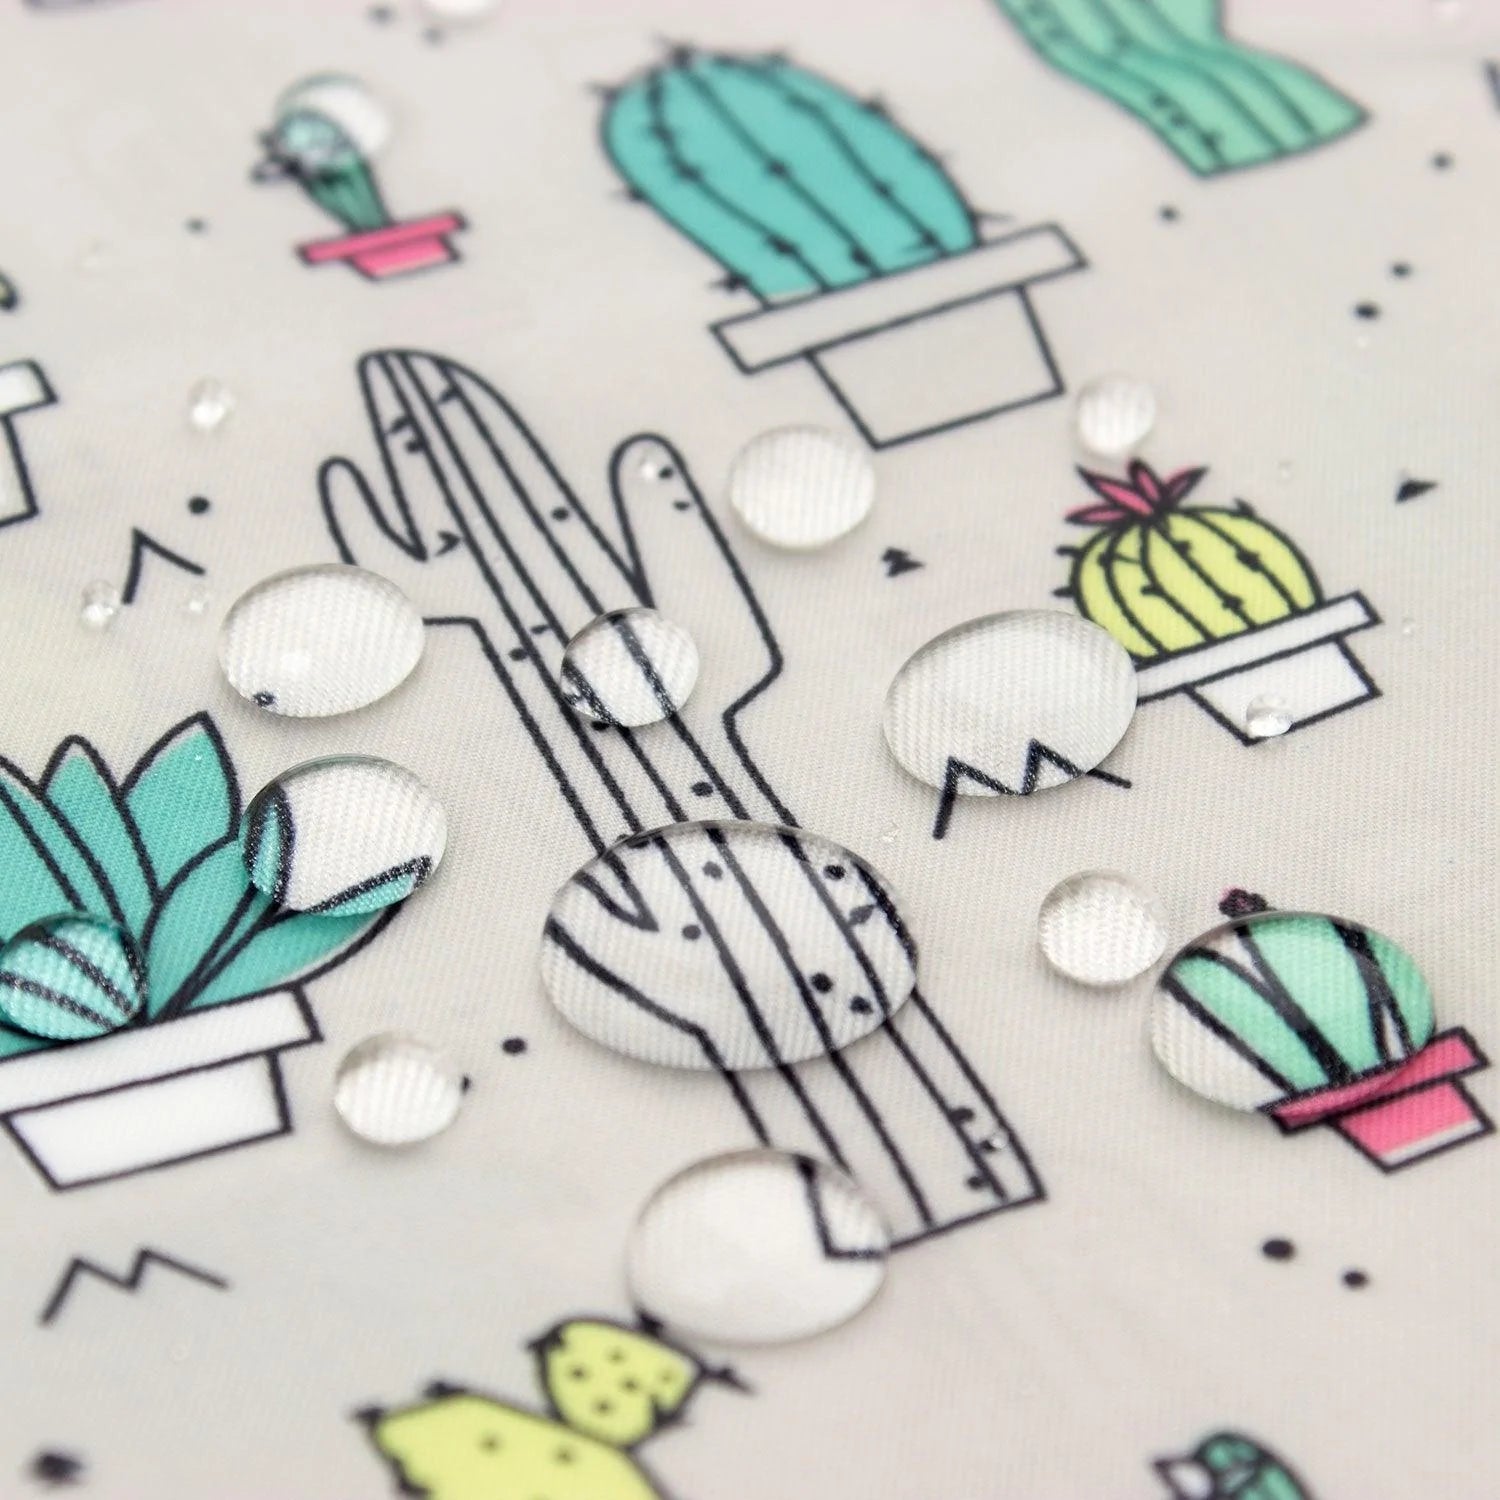 Reusable Snack Bag, Small 2-Pack: Quill & Cacti - Bumkins